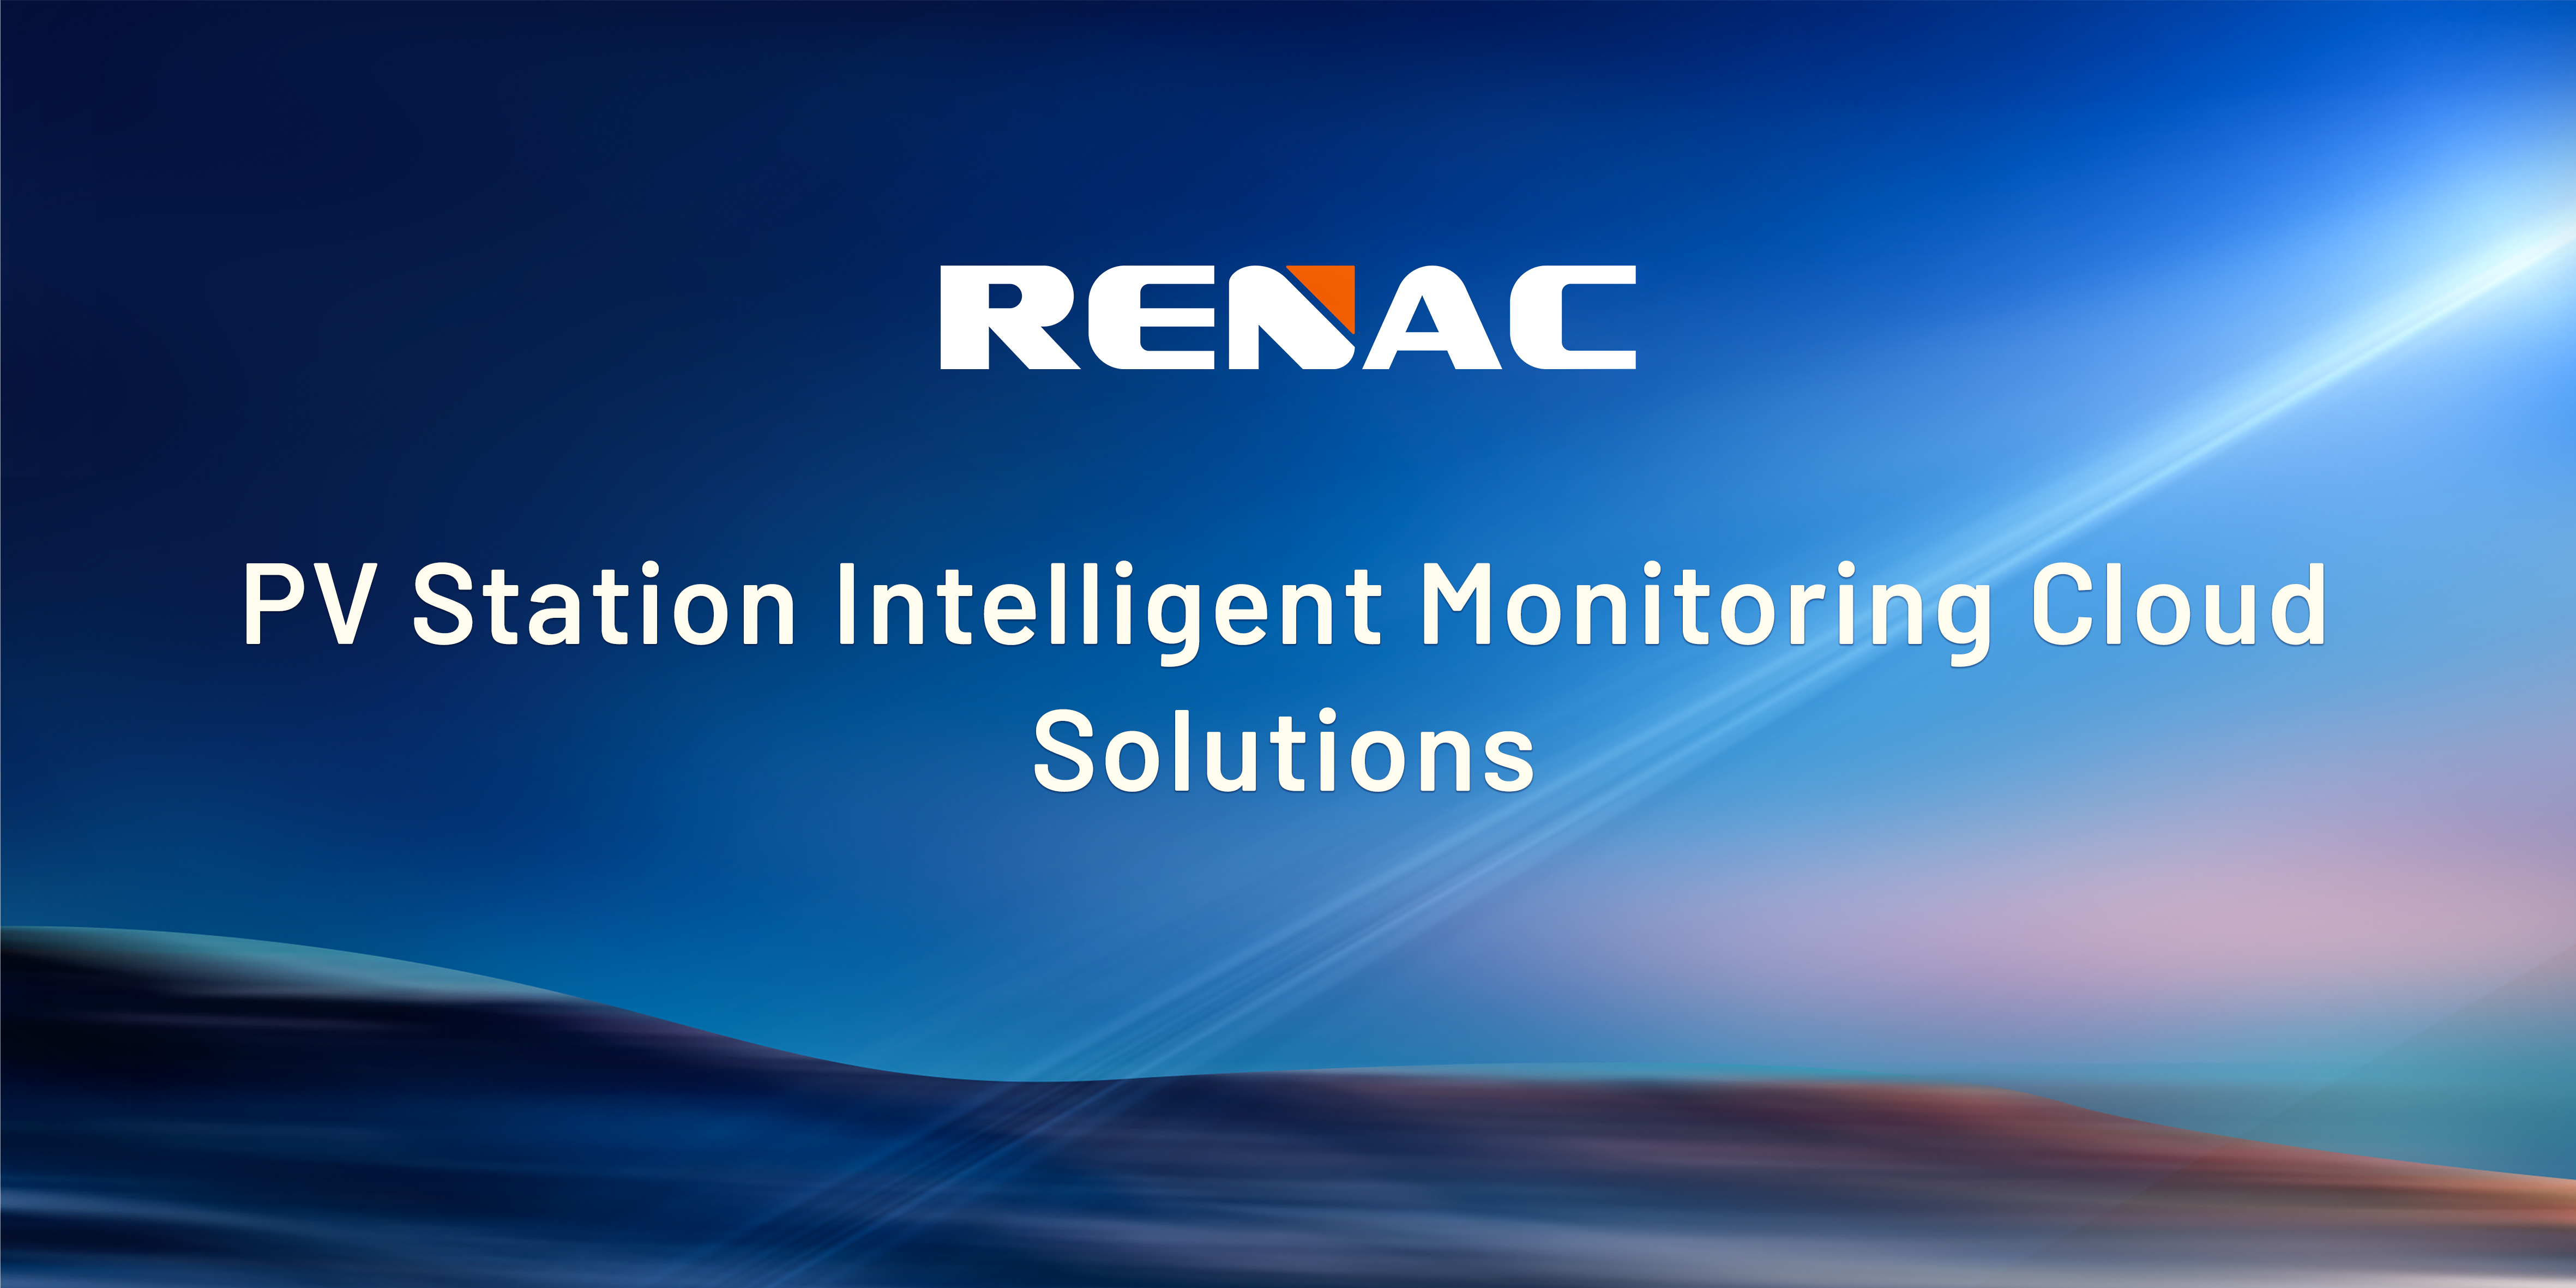 PV Station Intelligent Monitoring Cloud Solutions